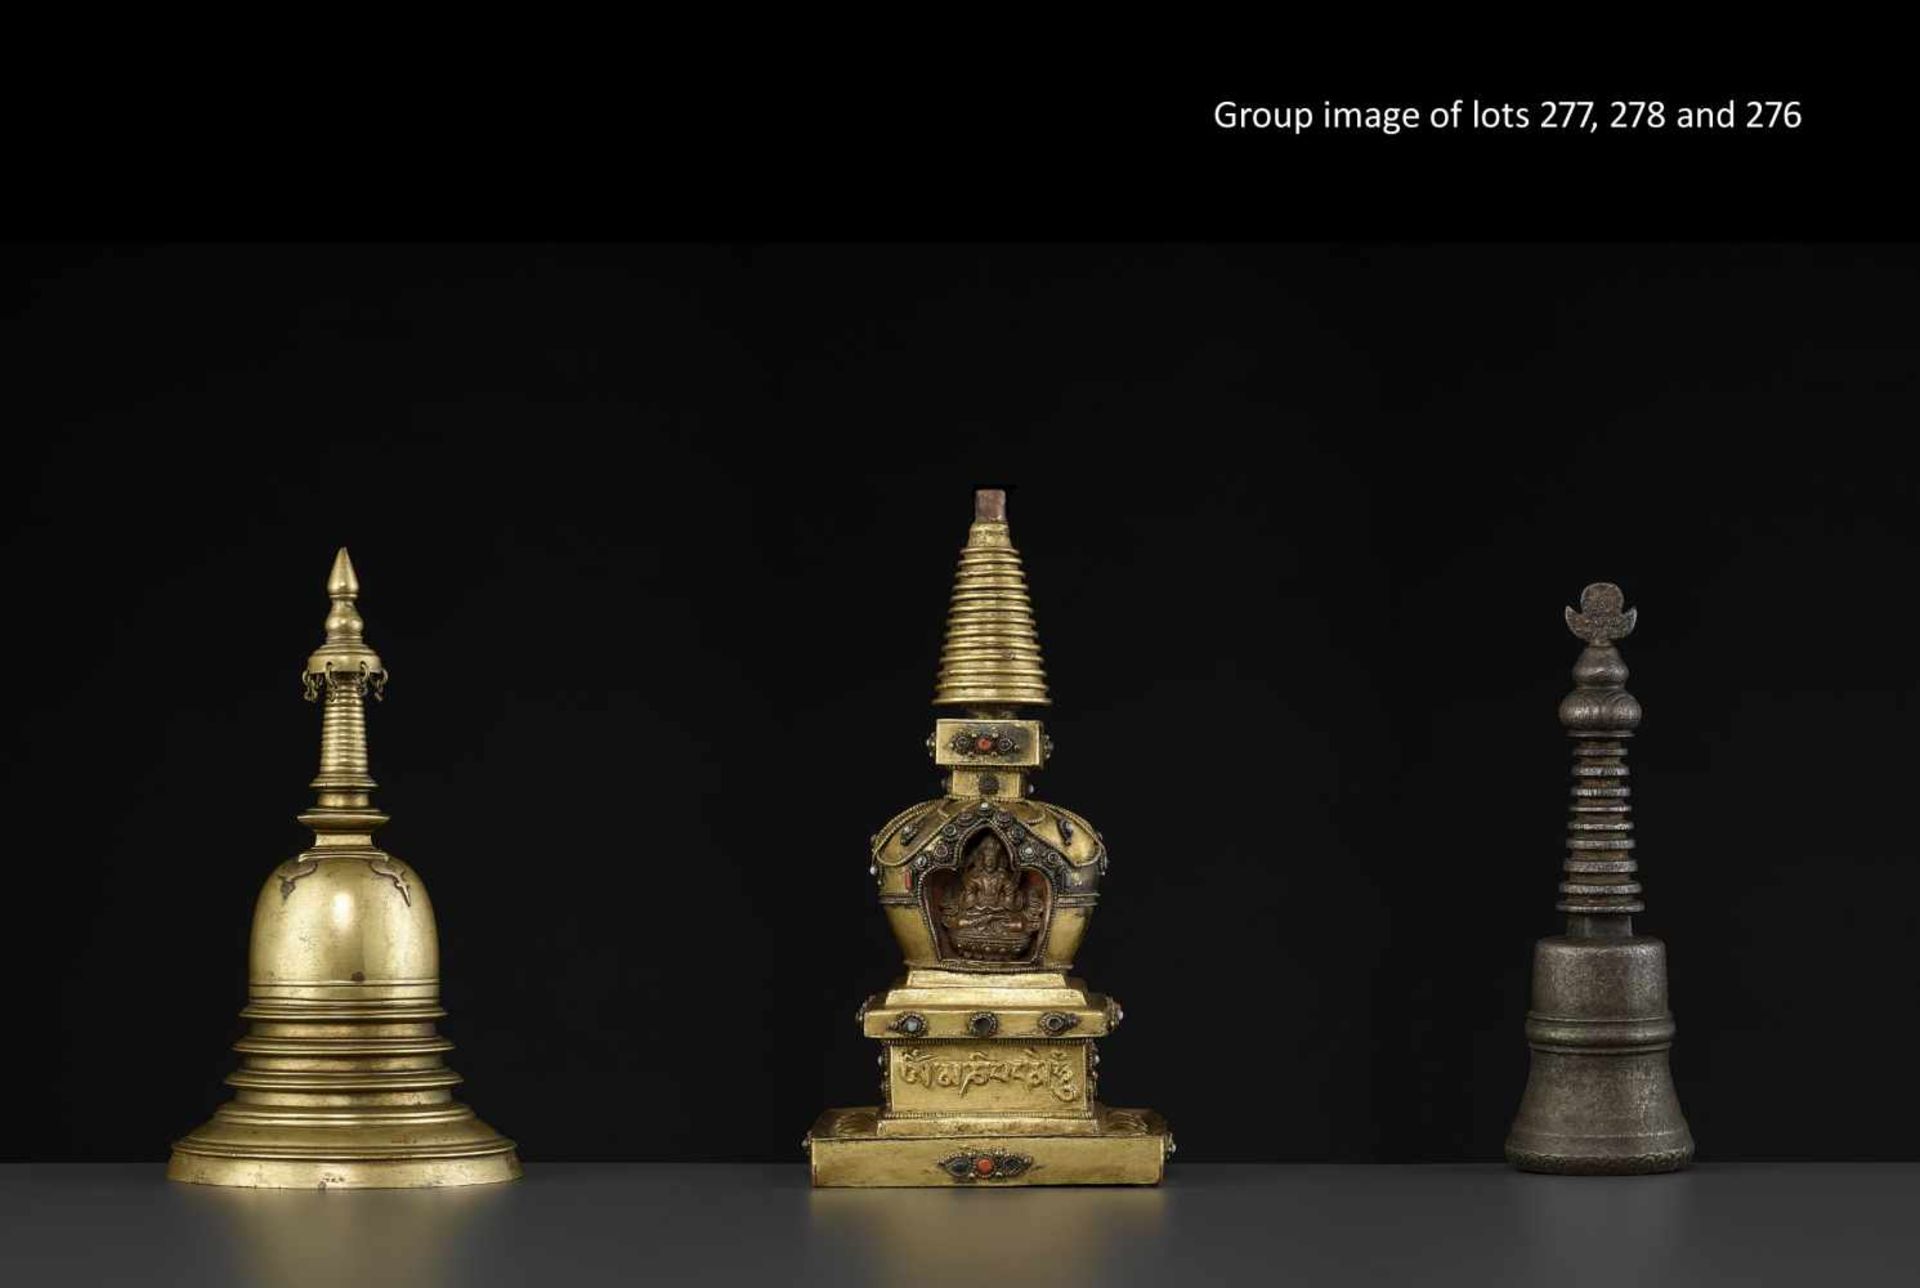 A REPOUSSE STUPA 18TH CENTURYTibet, 18TH to earlier 19TH century. A fire-gilt copper model of a - Image 11 of 11